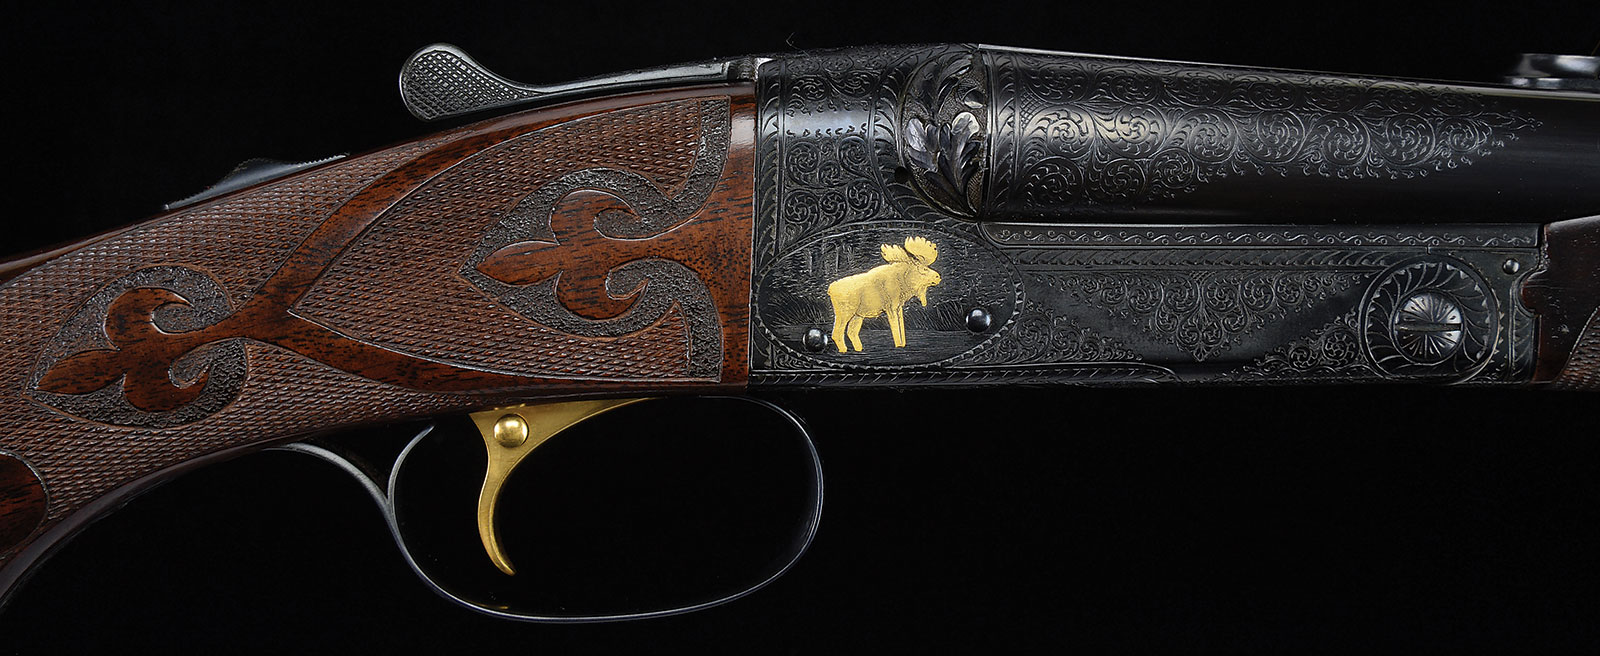 Experimental Winchester Model 21 "Grand American" Double Rifle in 45-70 with Case and Factory Letter (1 of 8 consecutively numbered experimental M21s being offered), estimated at $25,000-35,000.